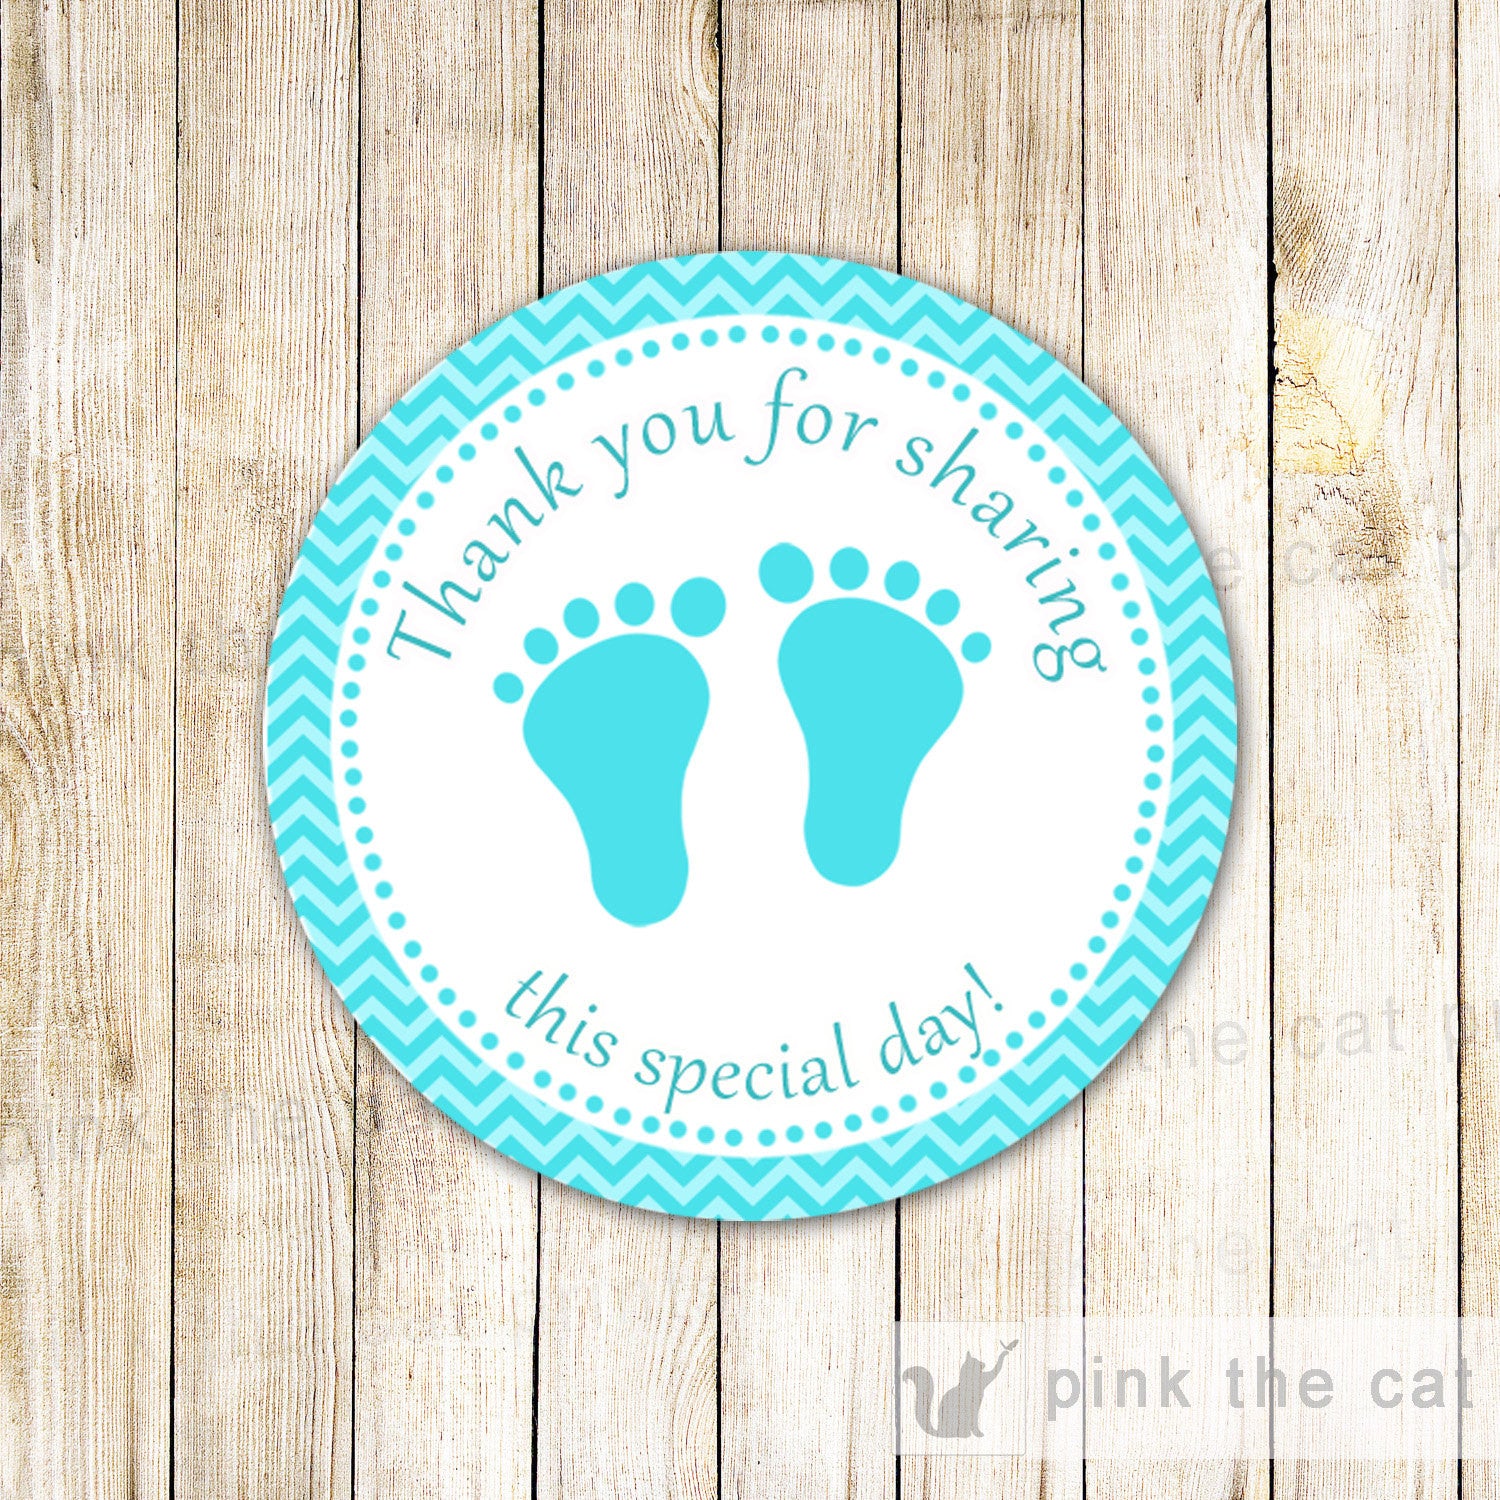 Chevron Turquoise Favor Label Sticker Gift Tag Baby Shower